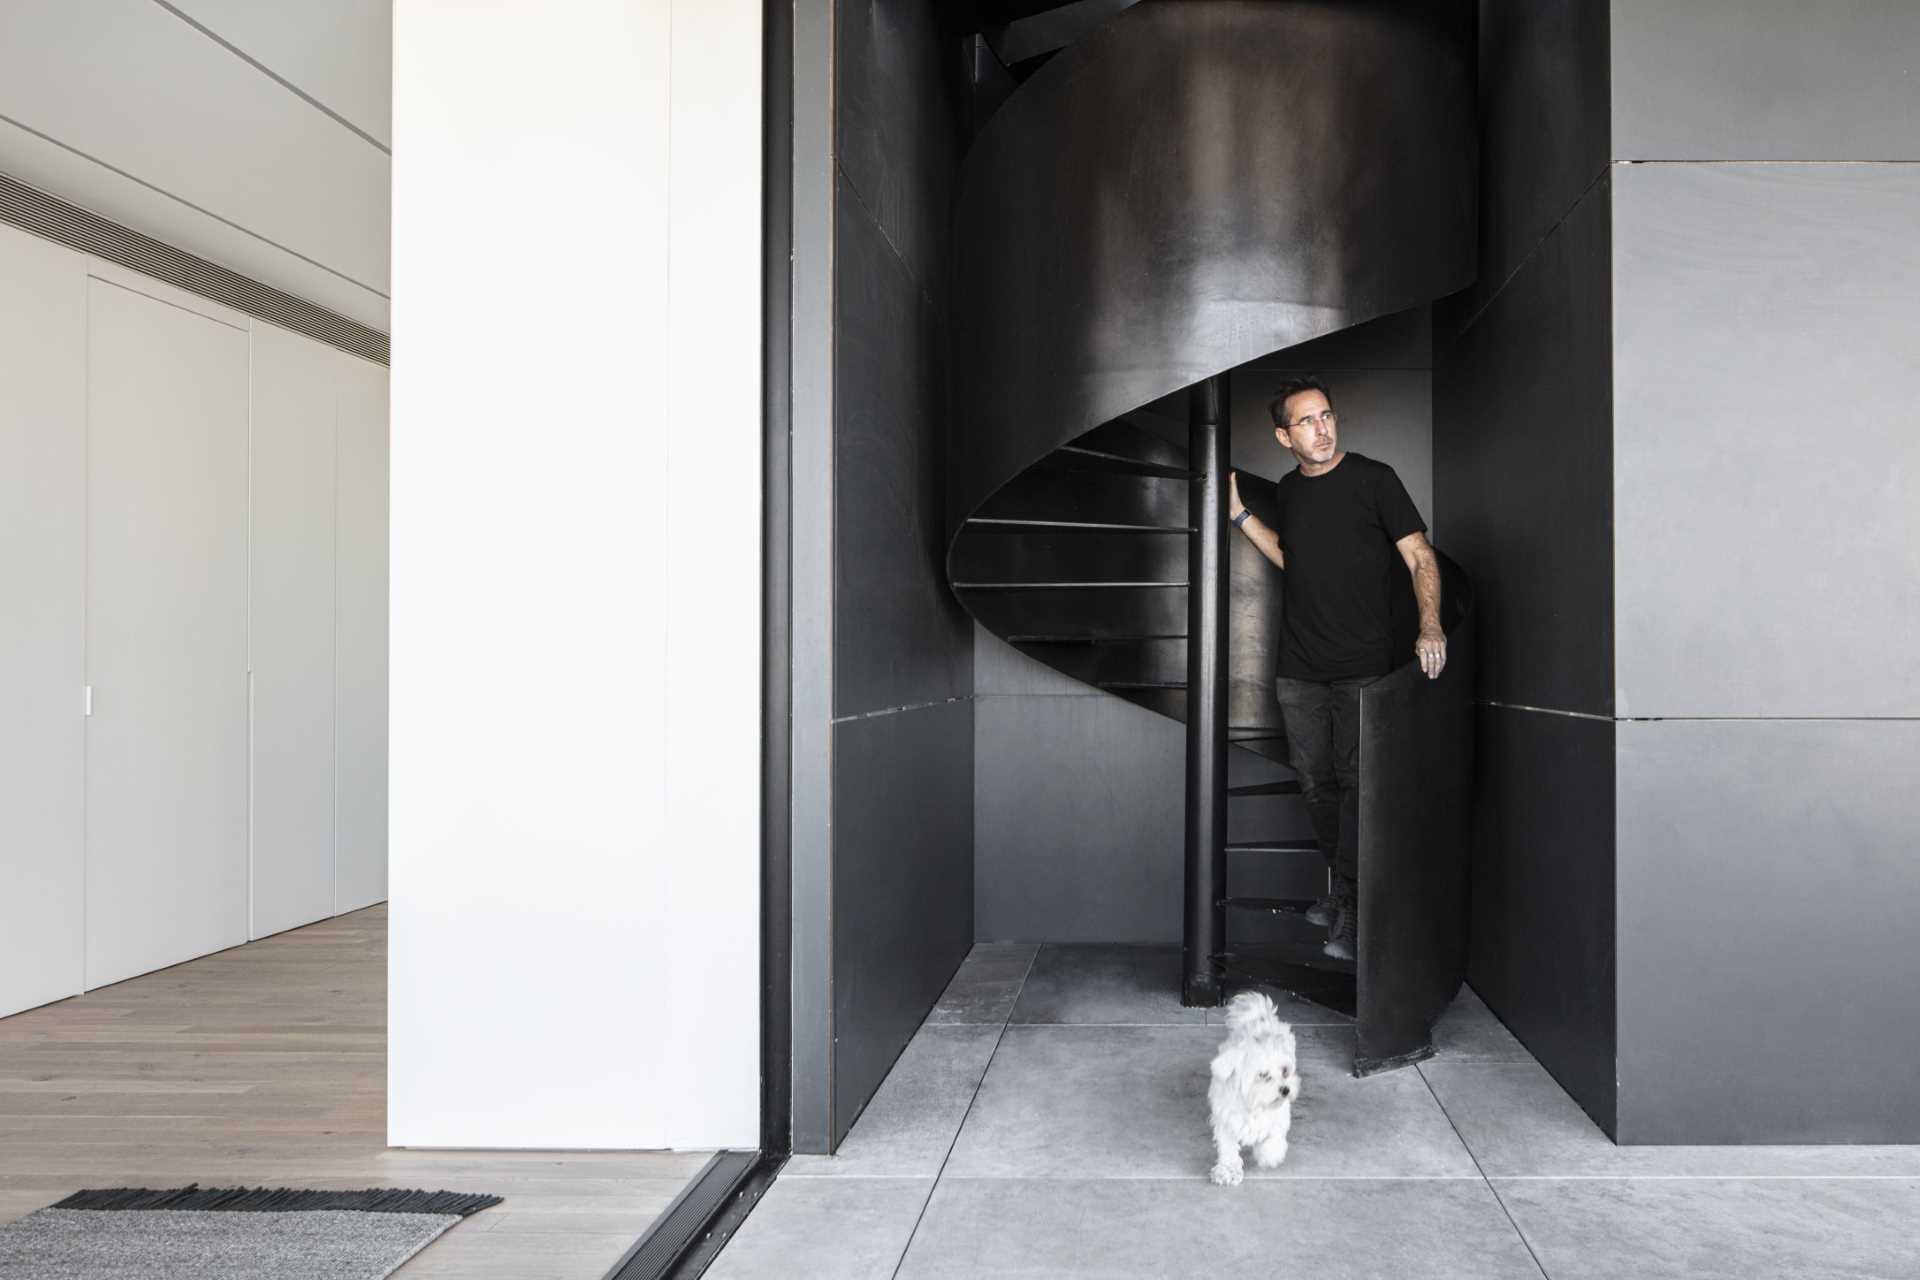 A modern penthouse apartment has black spiral stairs that lead to the rooftop.